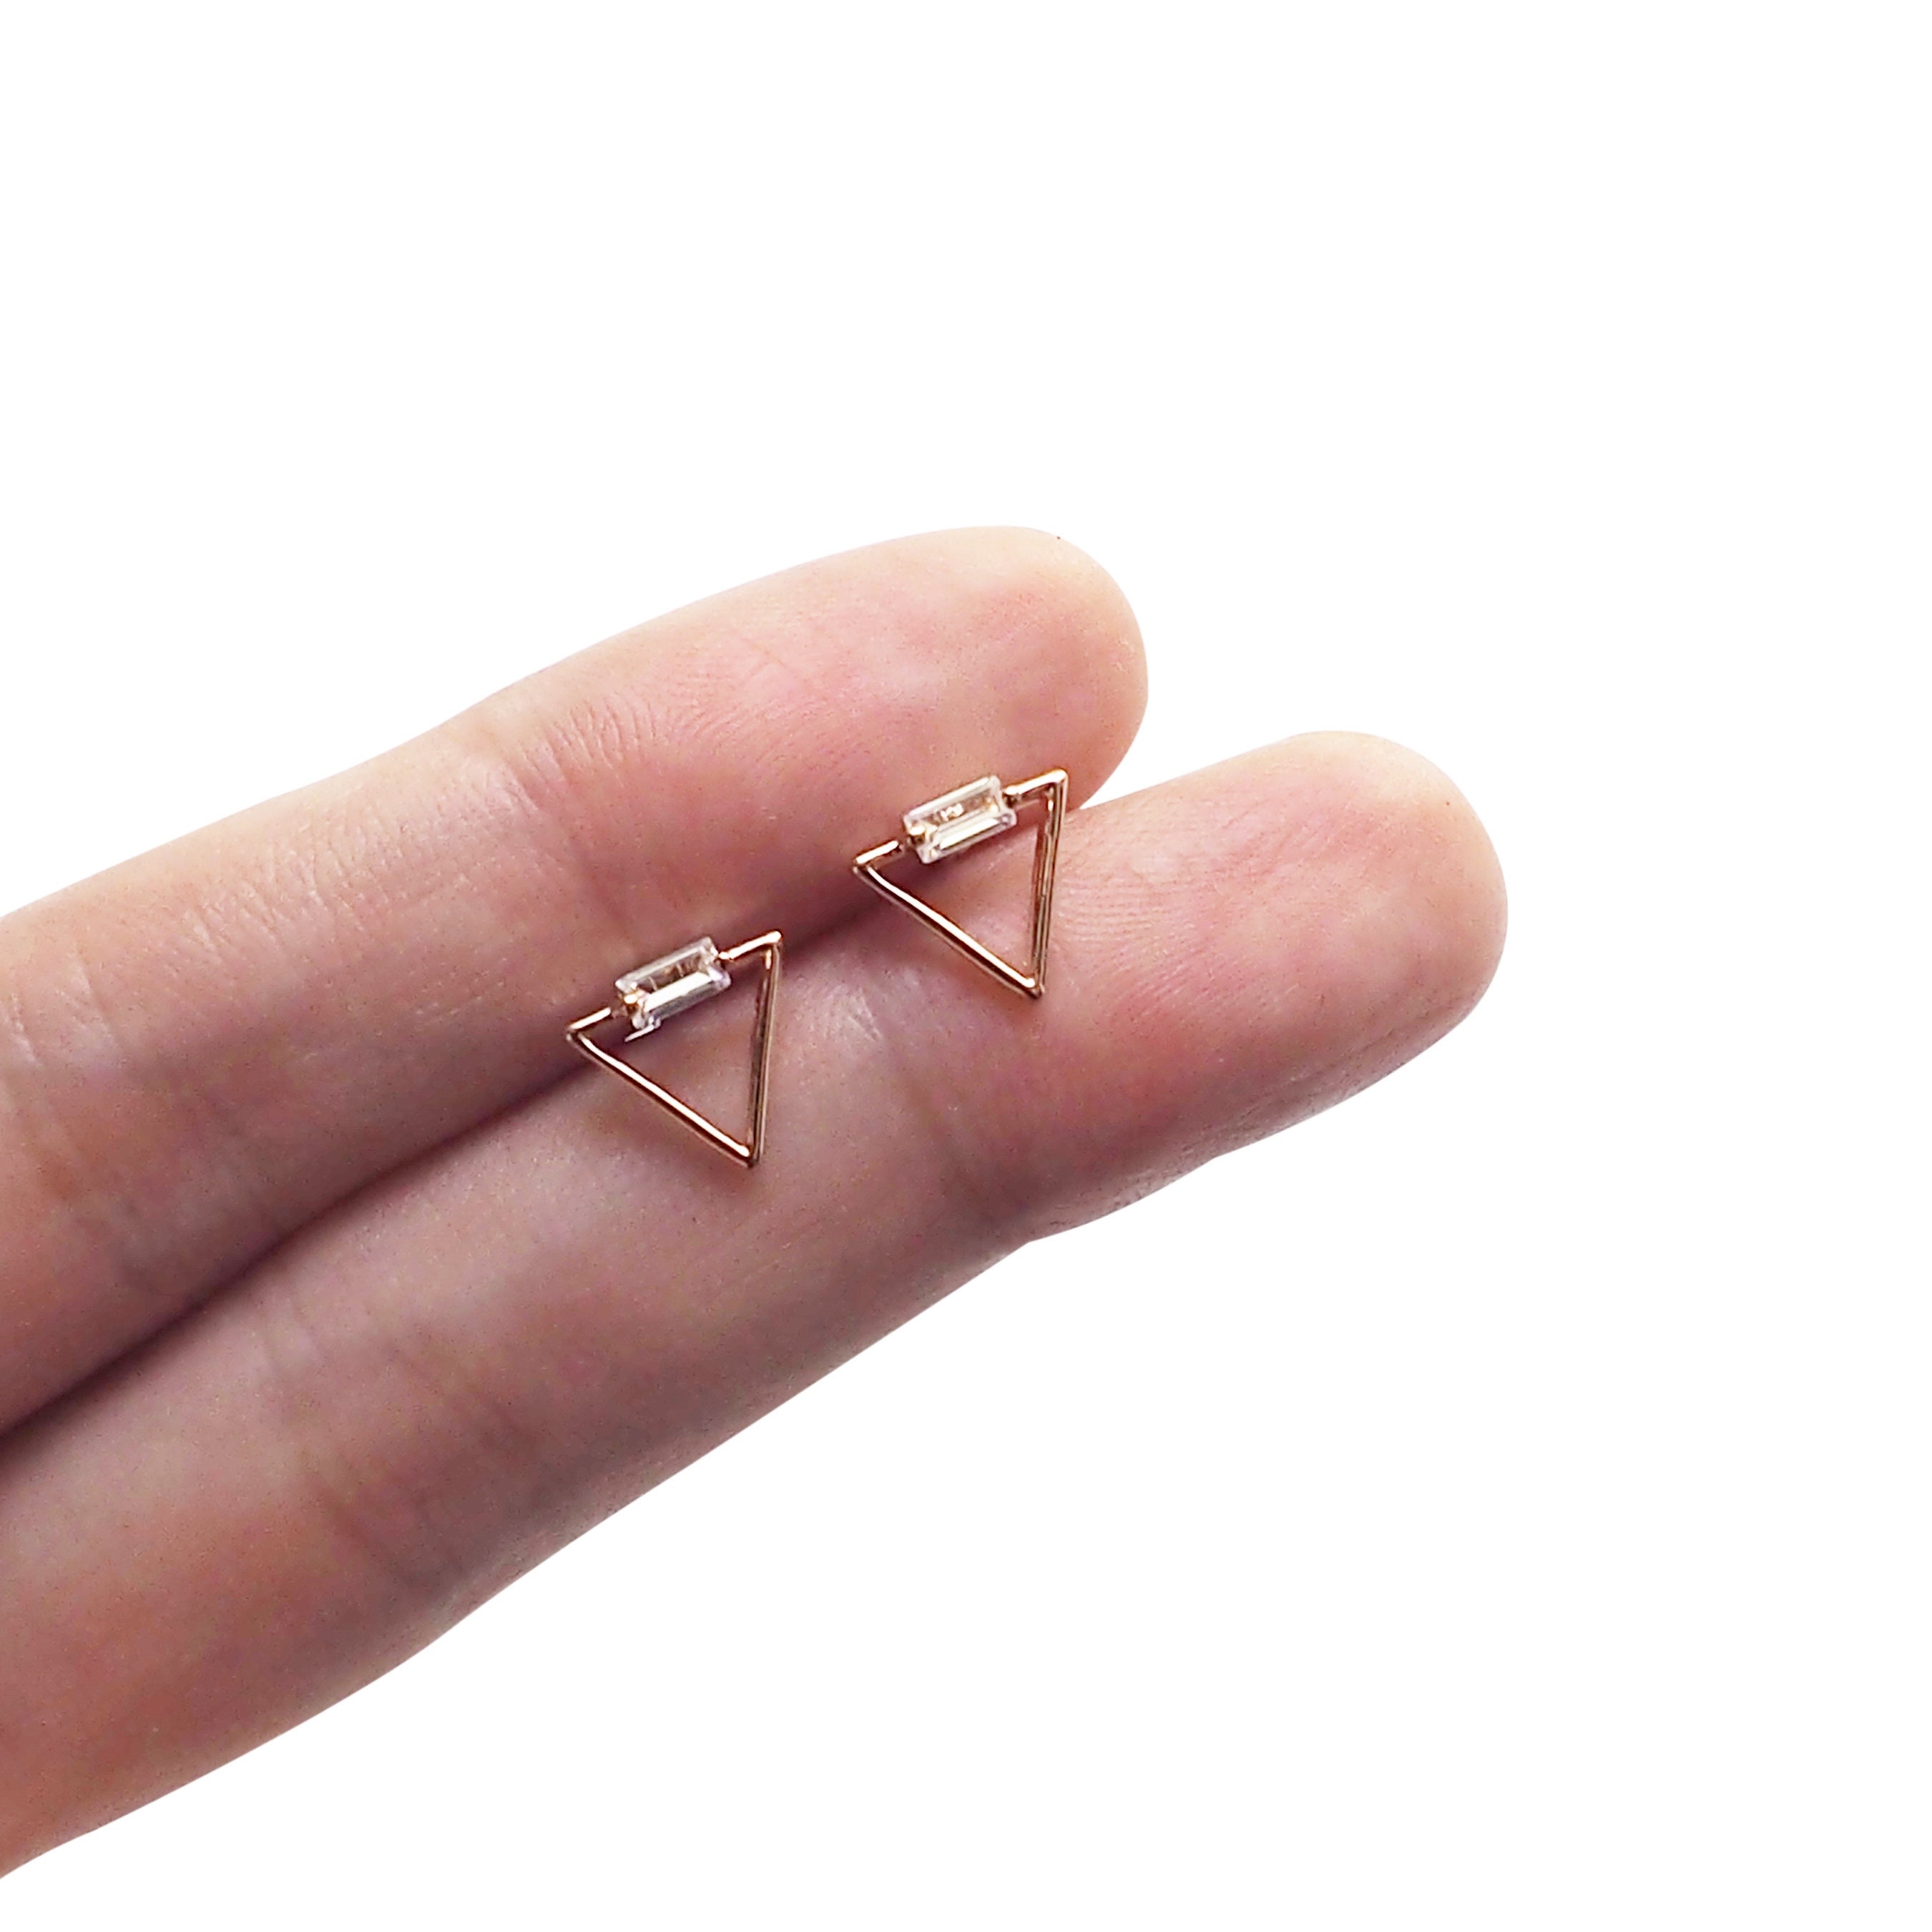 Simple Gold Bar Stud Earrings with a Contrast - Tales In Gold